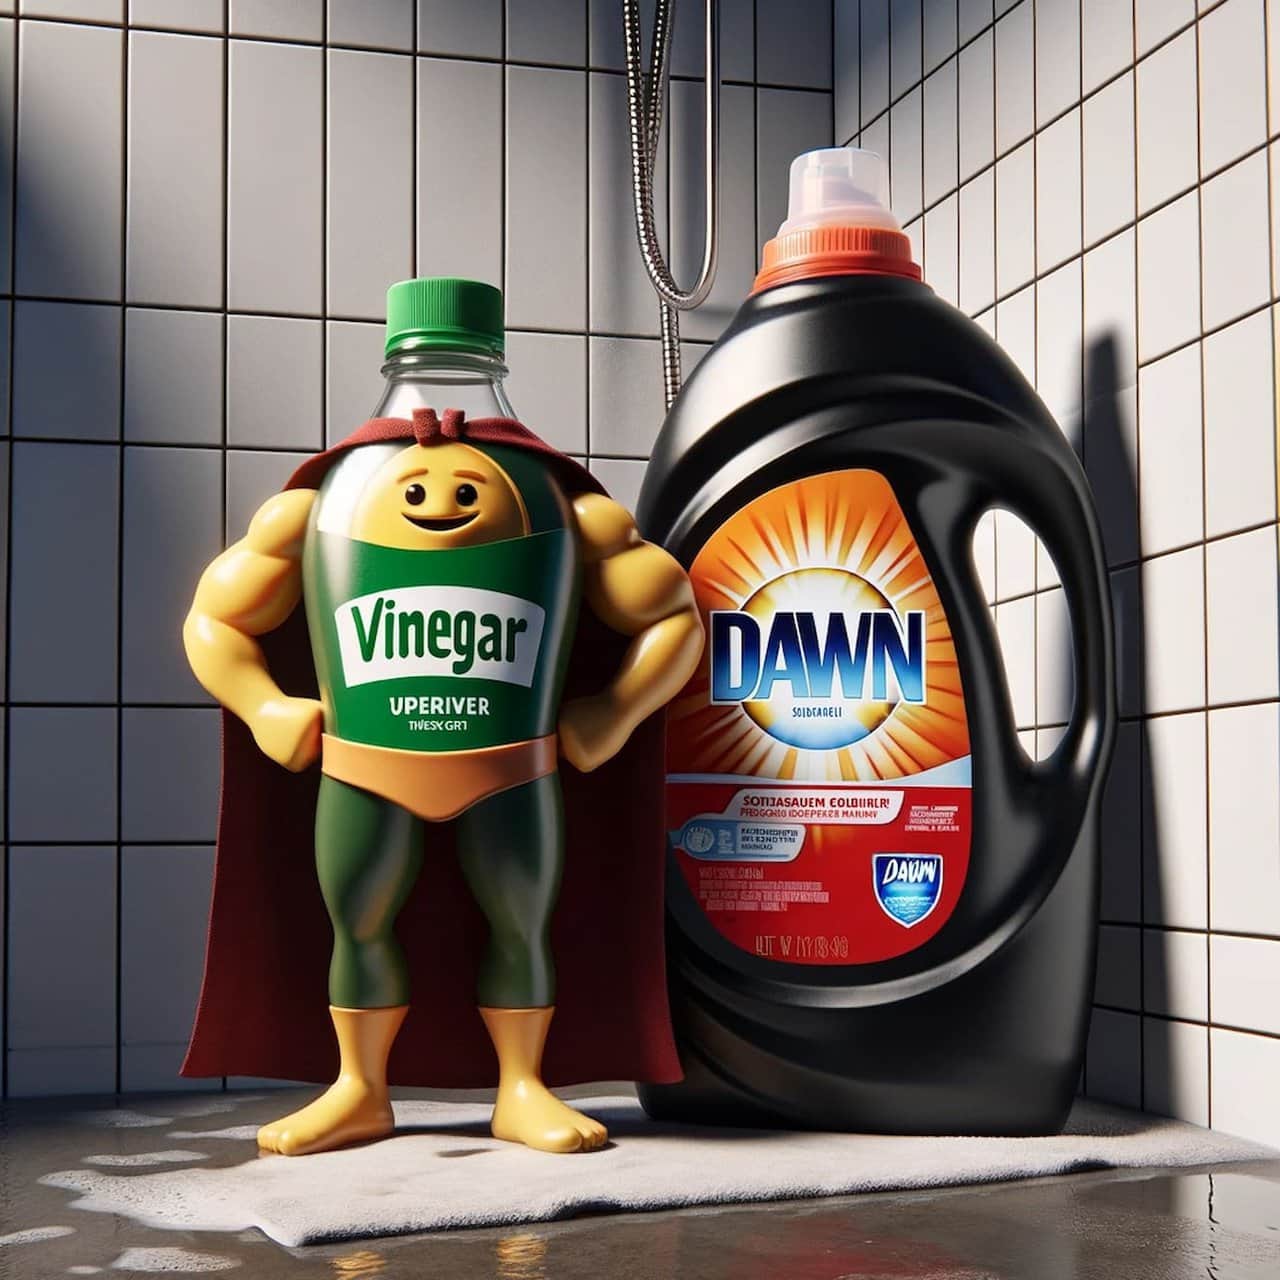 Dawn and vinegar shower cleaner is depicted Anthropomorphic Dawn dish detergent and vinegar bottles with superhero capes standing in a shower, representing a homemade cleaning solution for battling bathroom dirt and grime.